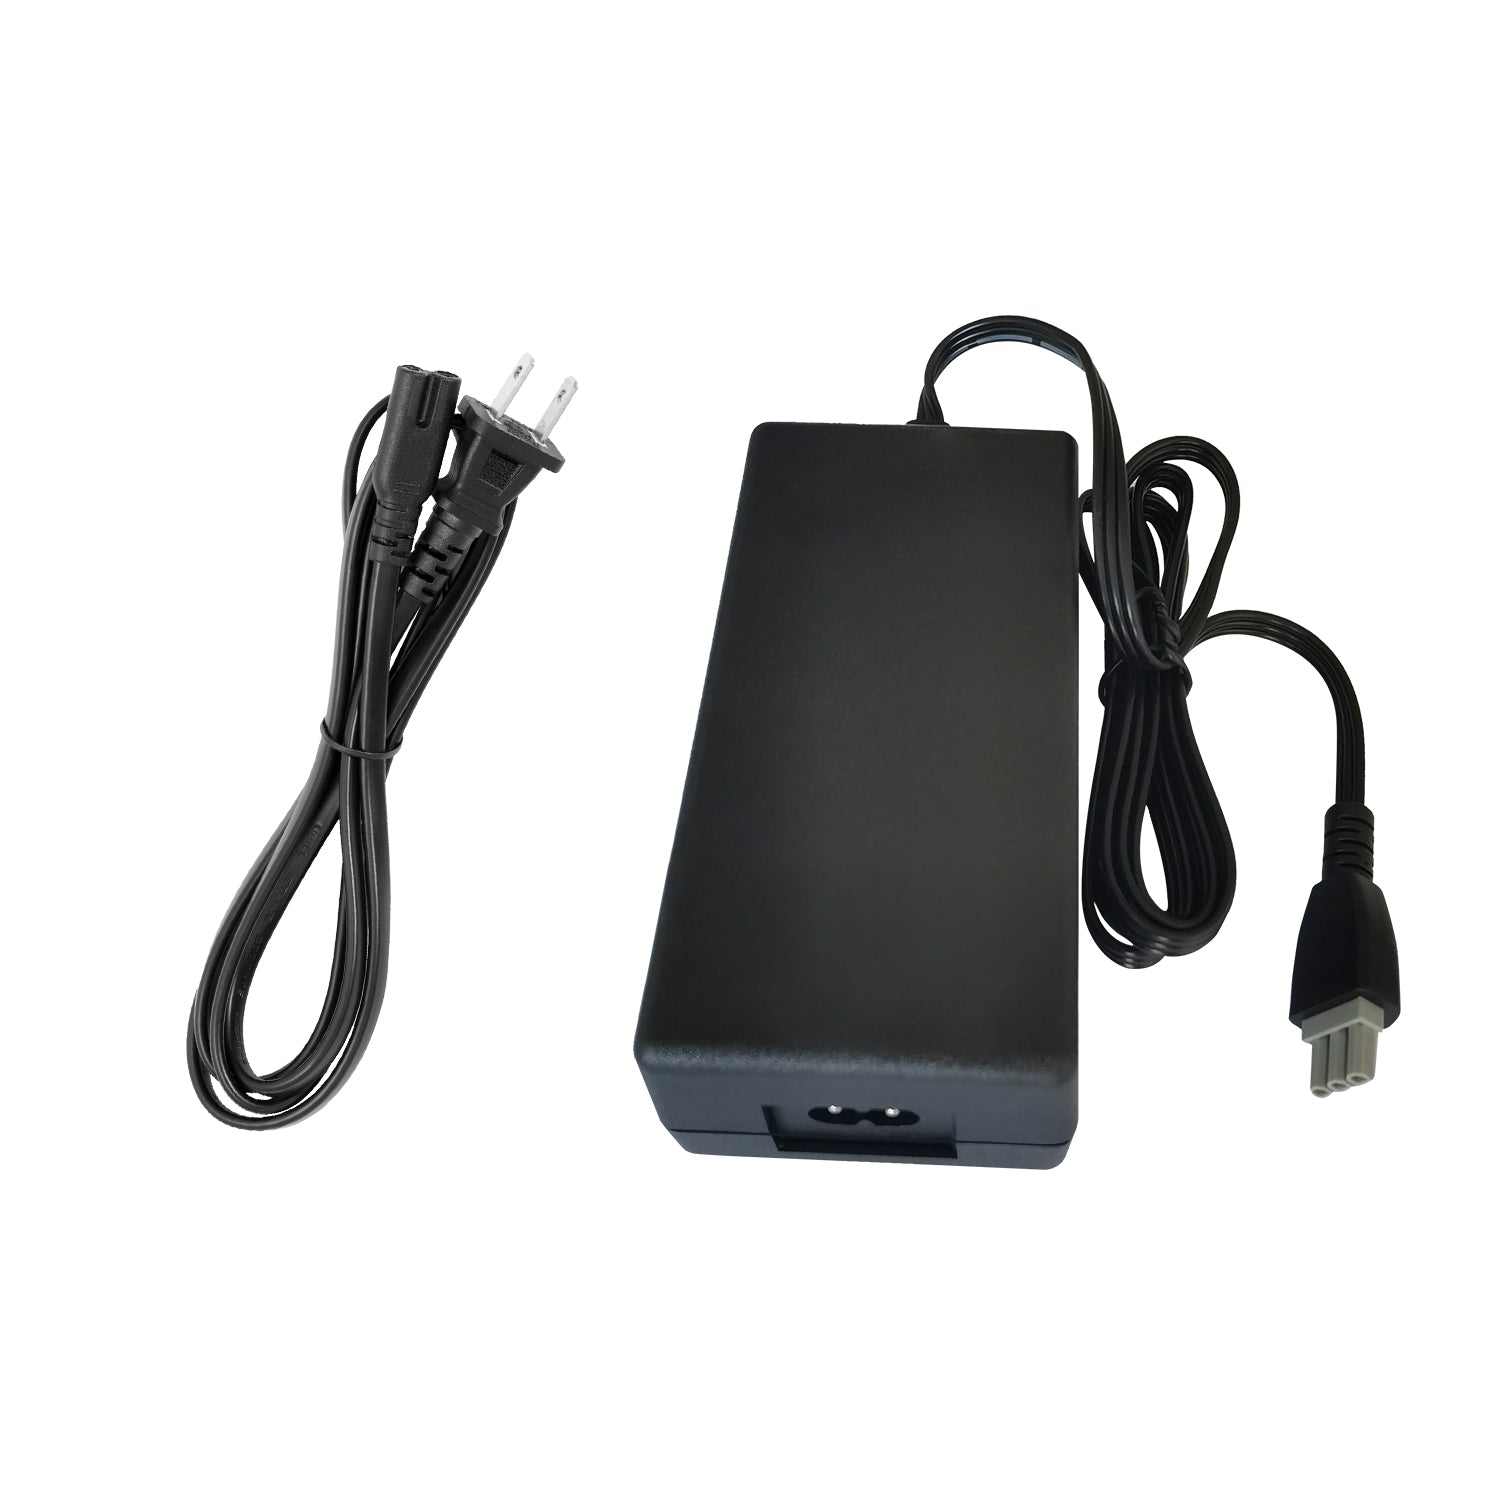 Power Adapter for HP PSC 1508 All-in-One Printer.